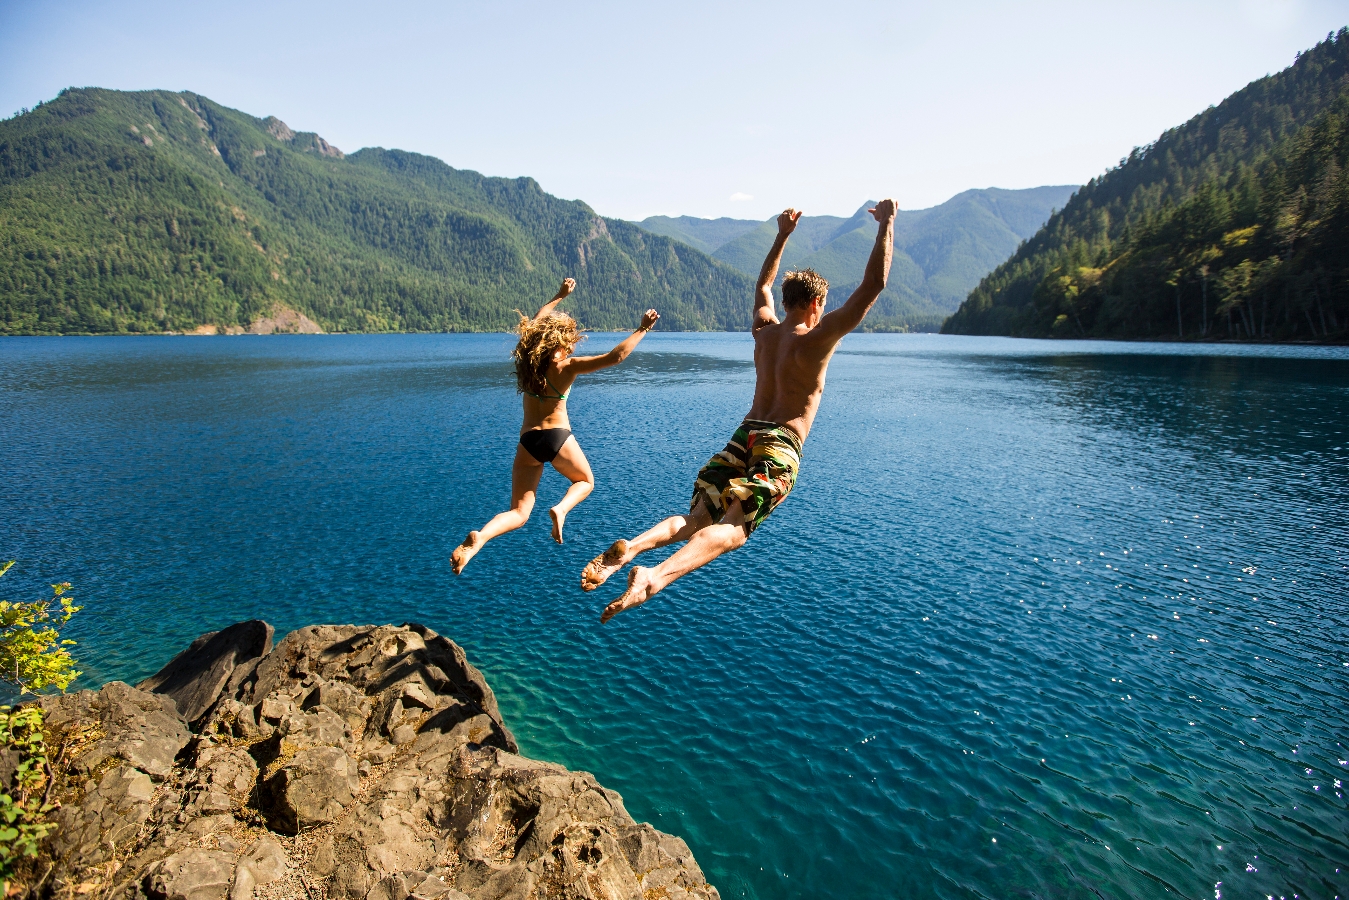 Couple jumping into the lake